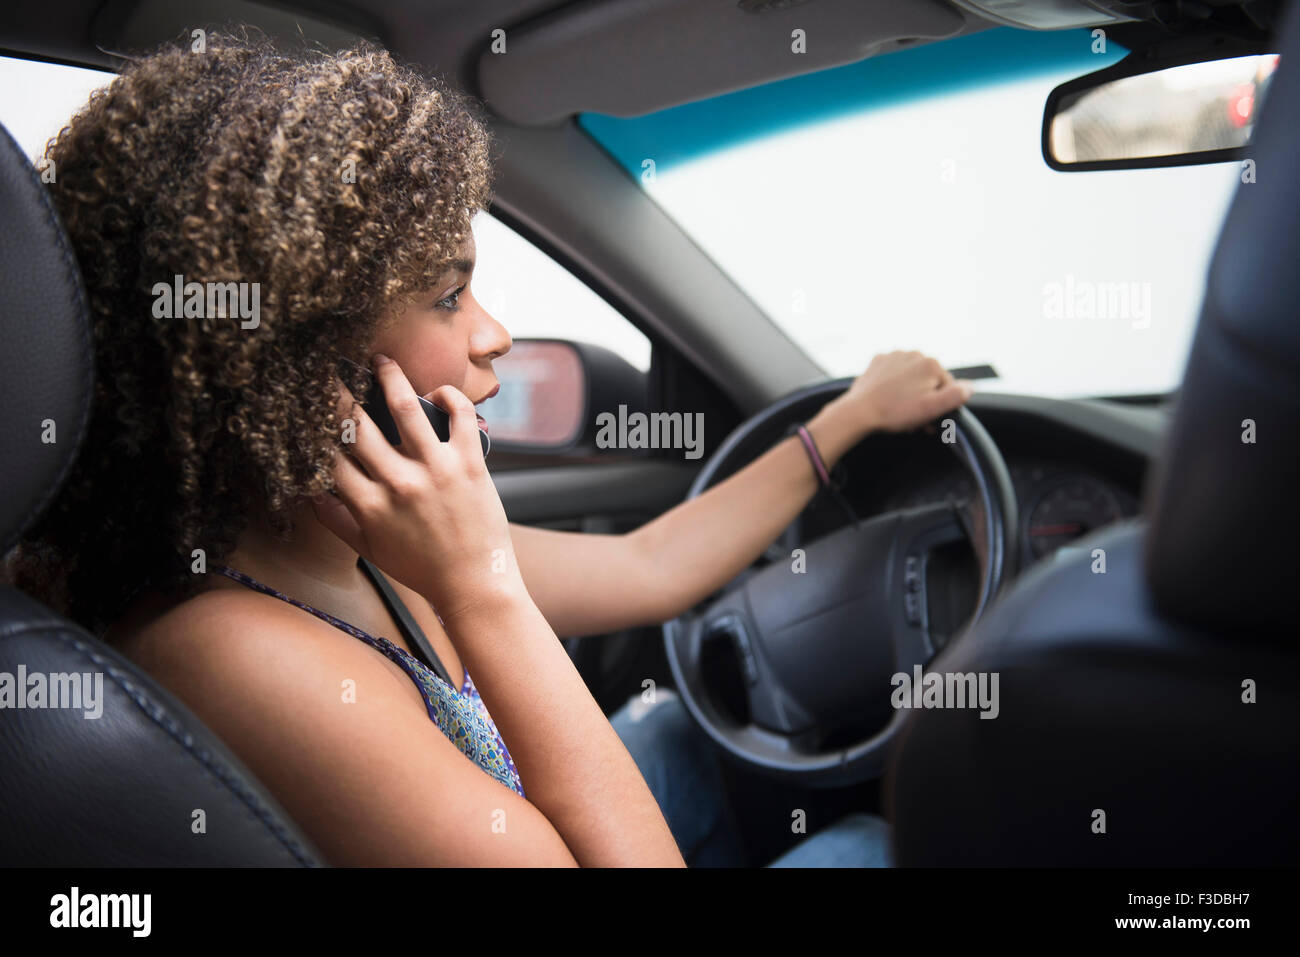 Young woman using phone while driving car Stock Photo